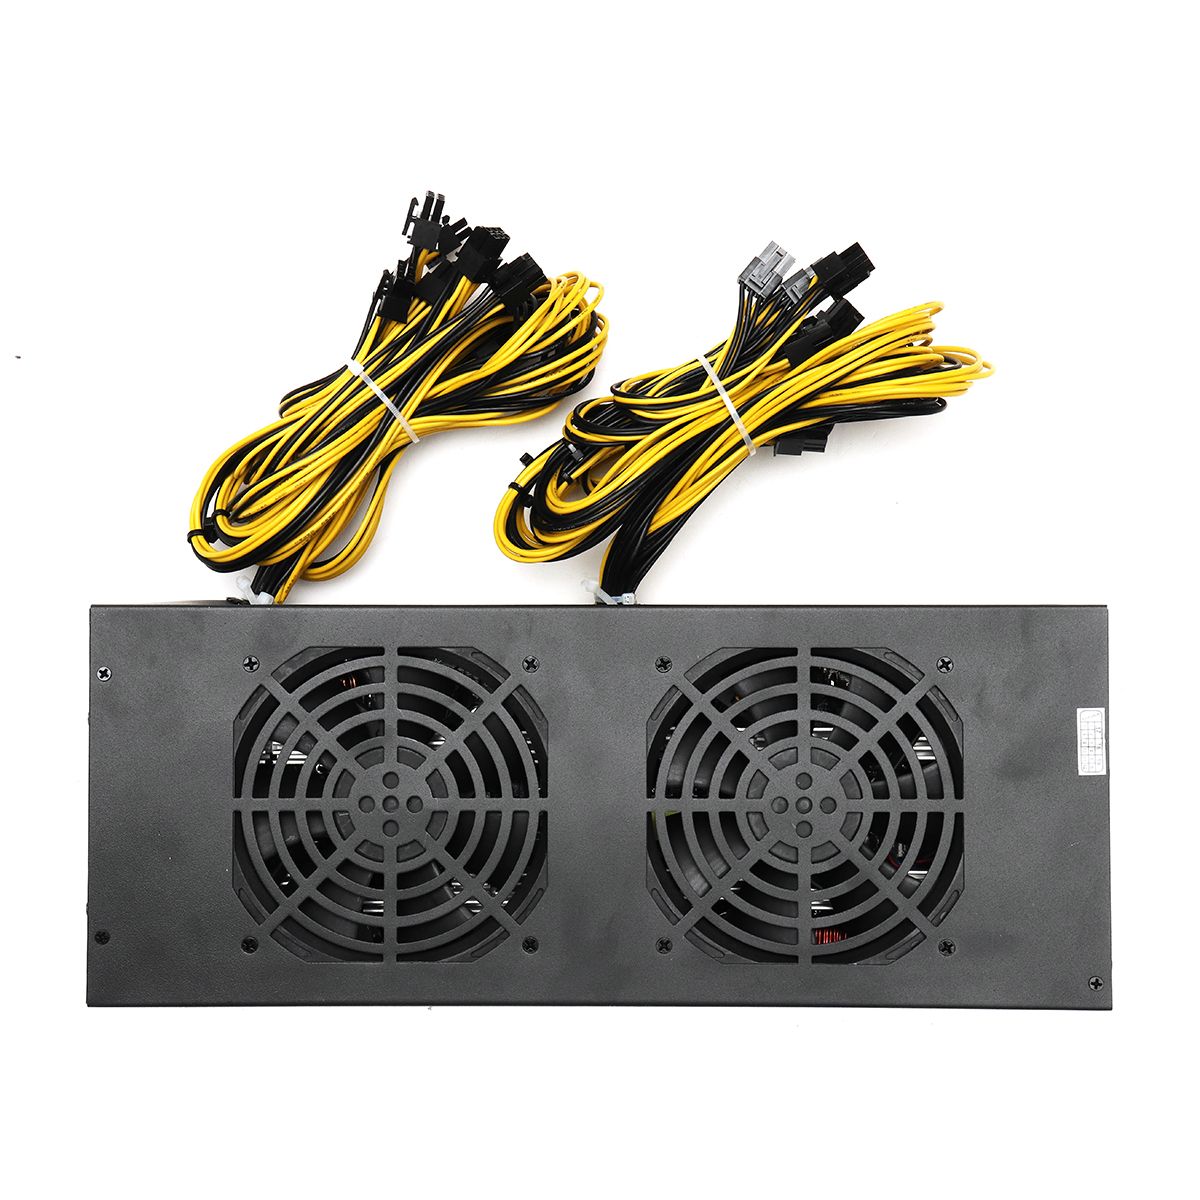 3600W-Miner-Mining-Power-Supply-Mining-Rig-Machine-with-Four-Fans-For-A6-A7-s5-s7-B3-E9-L3-R4-Miner-1243747